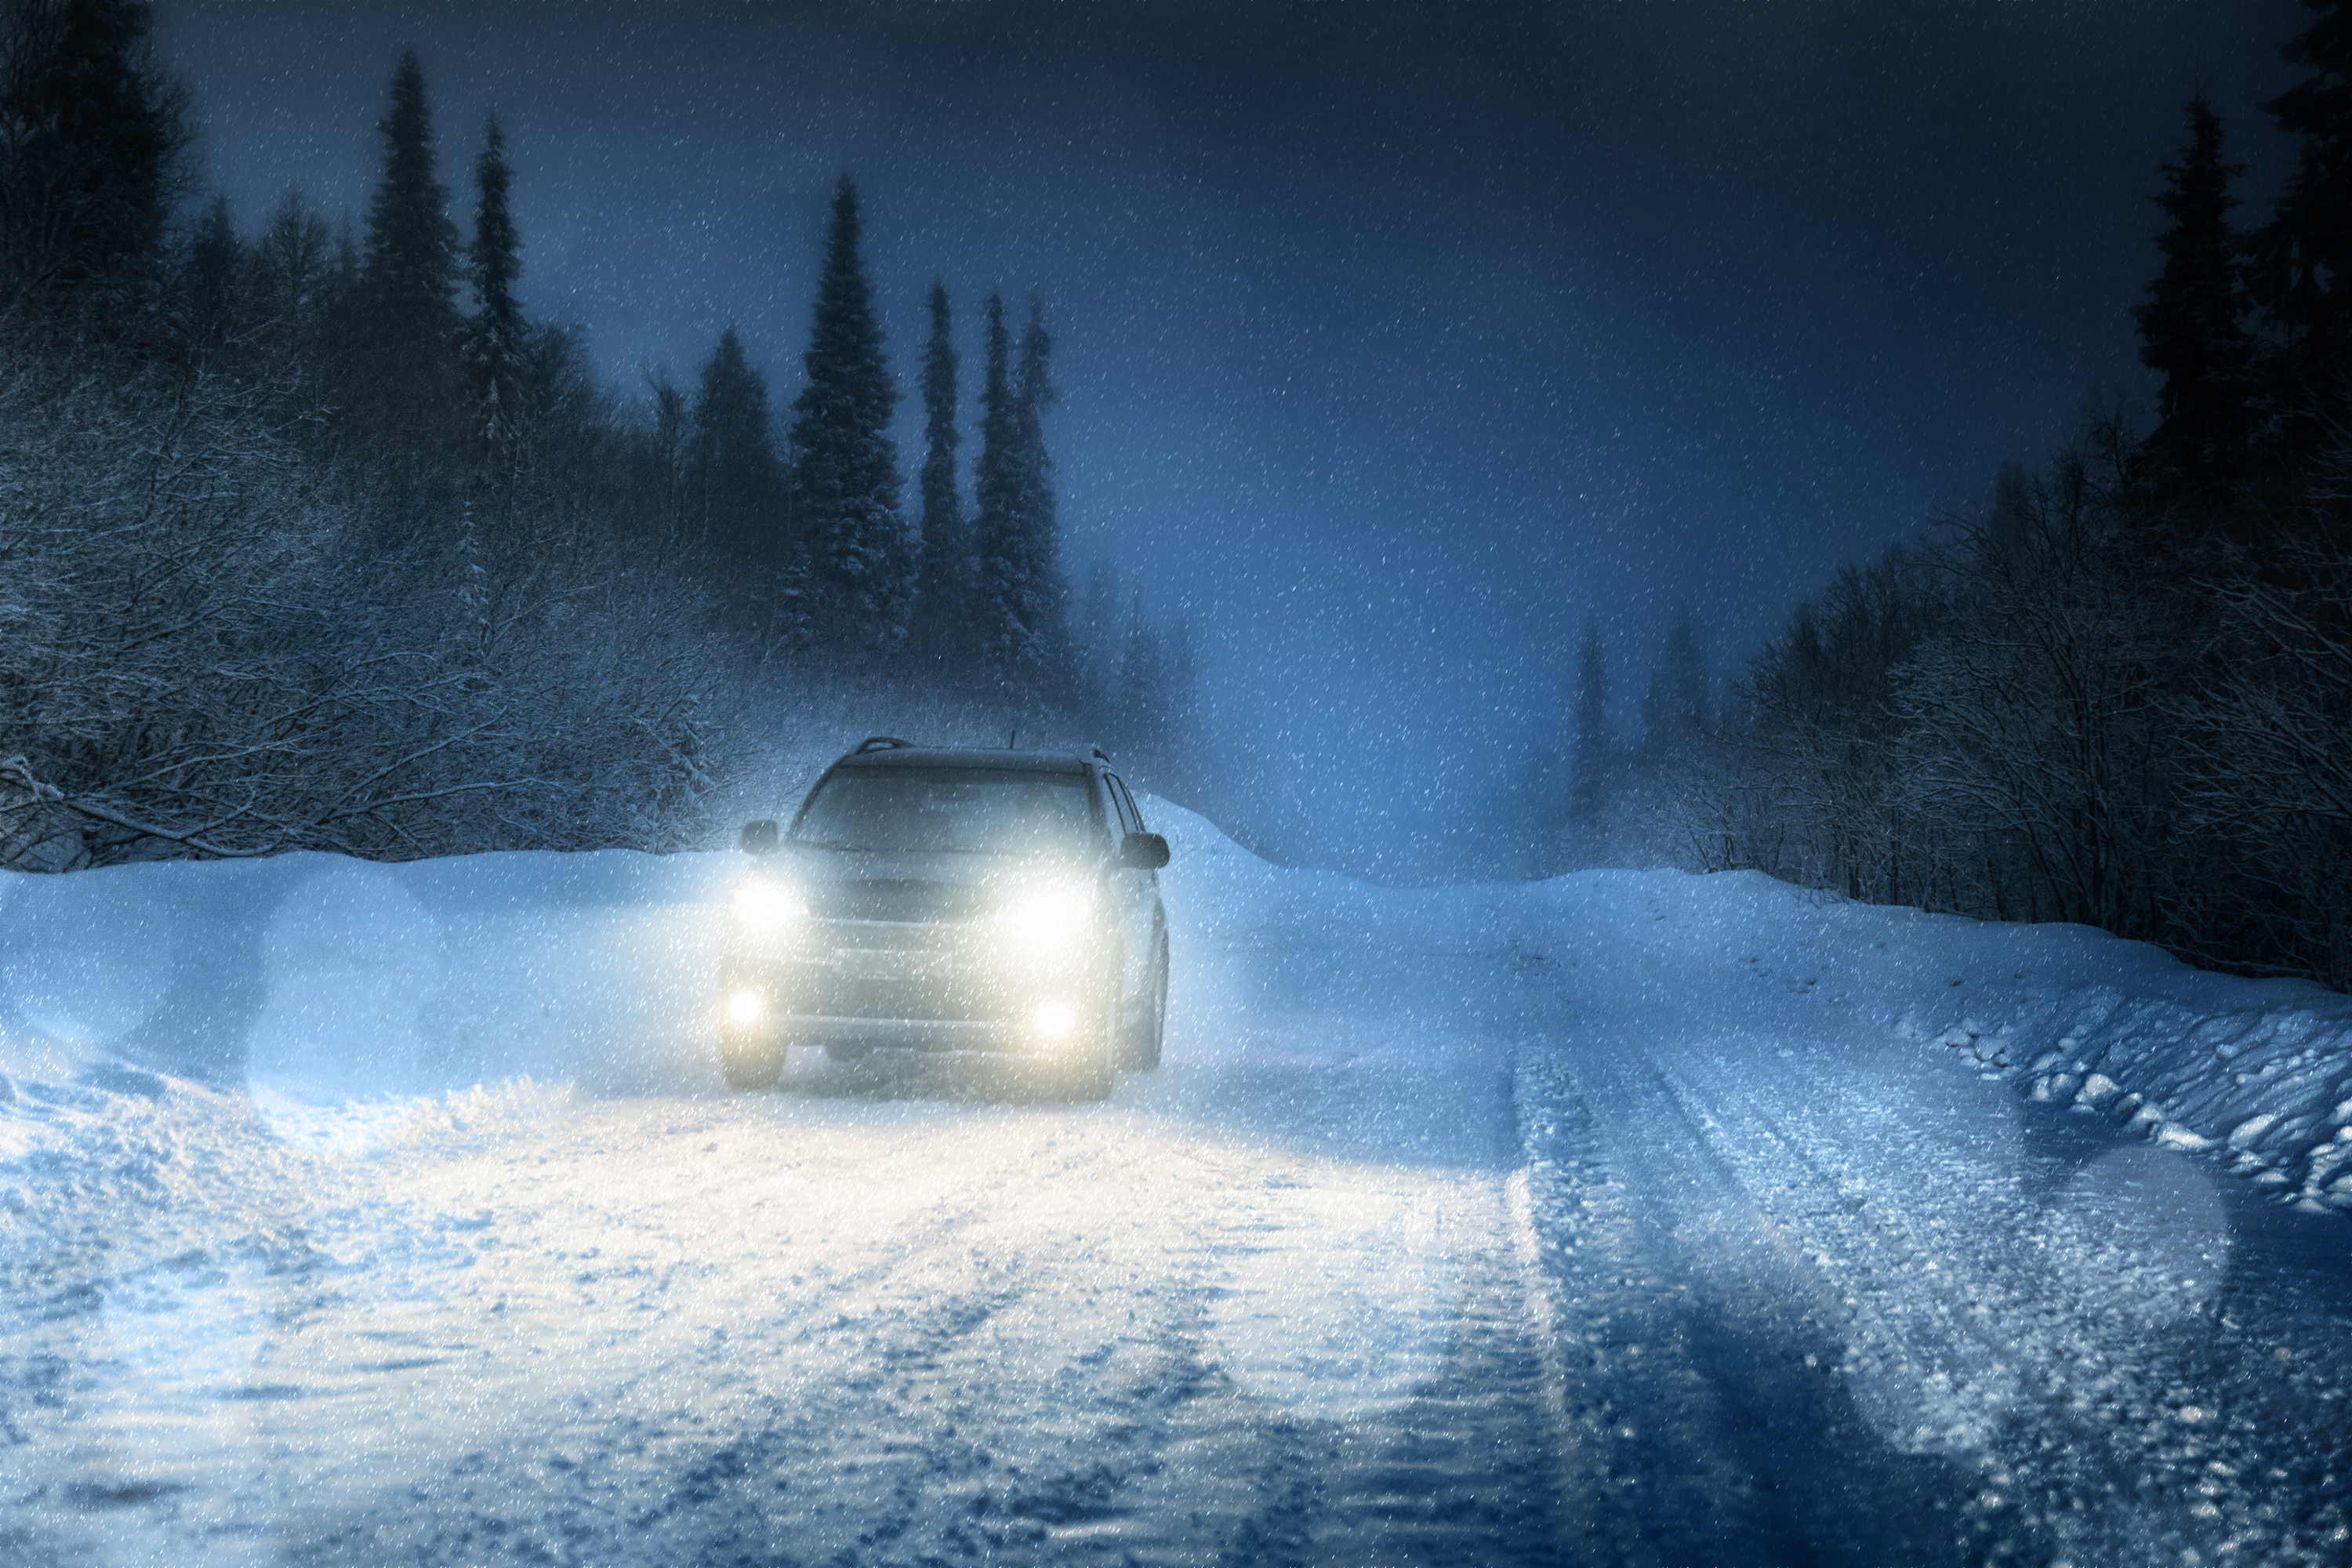 Car with headlights on driving down a winter road at night